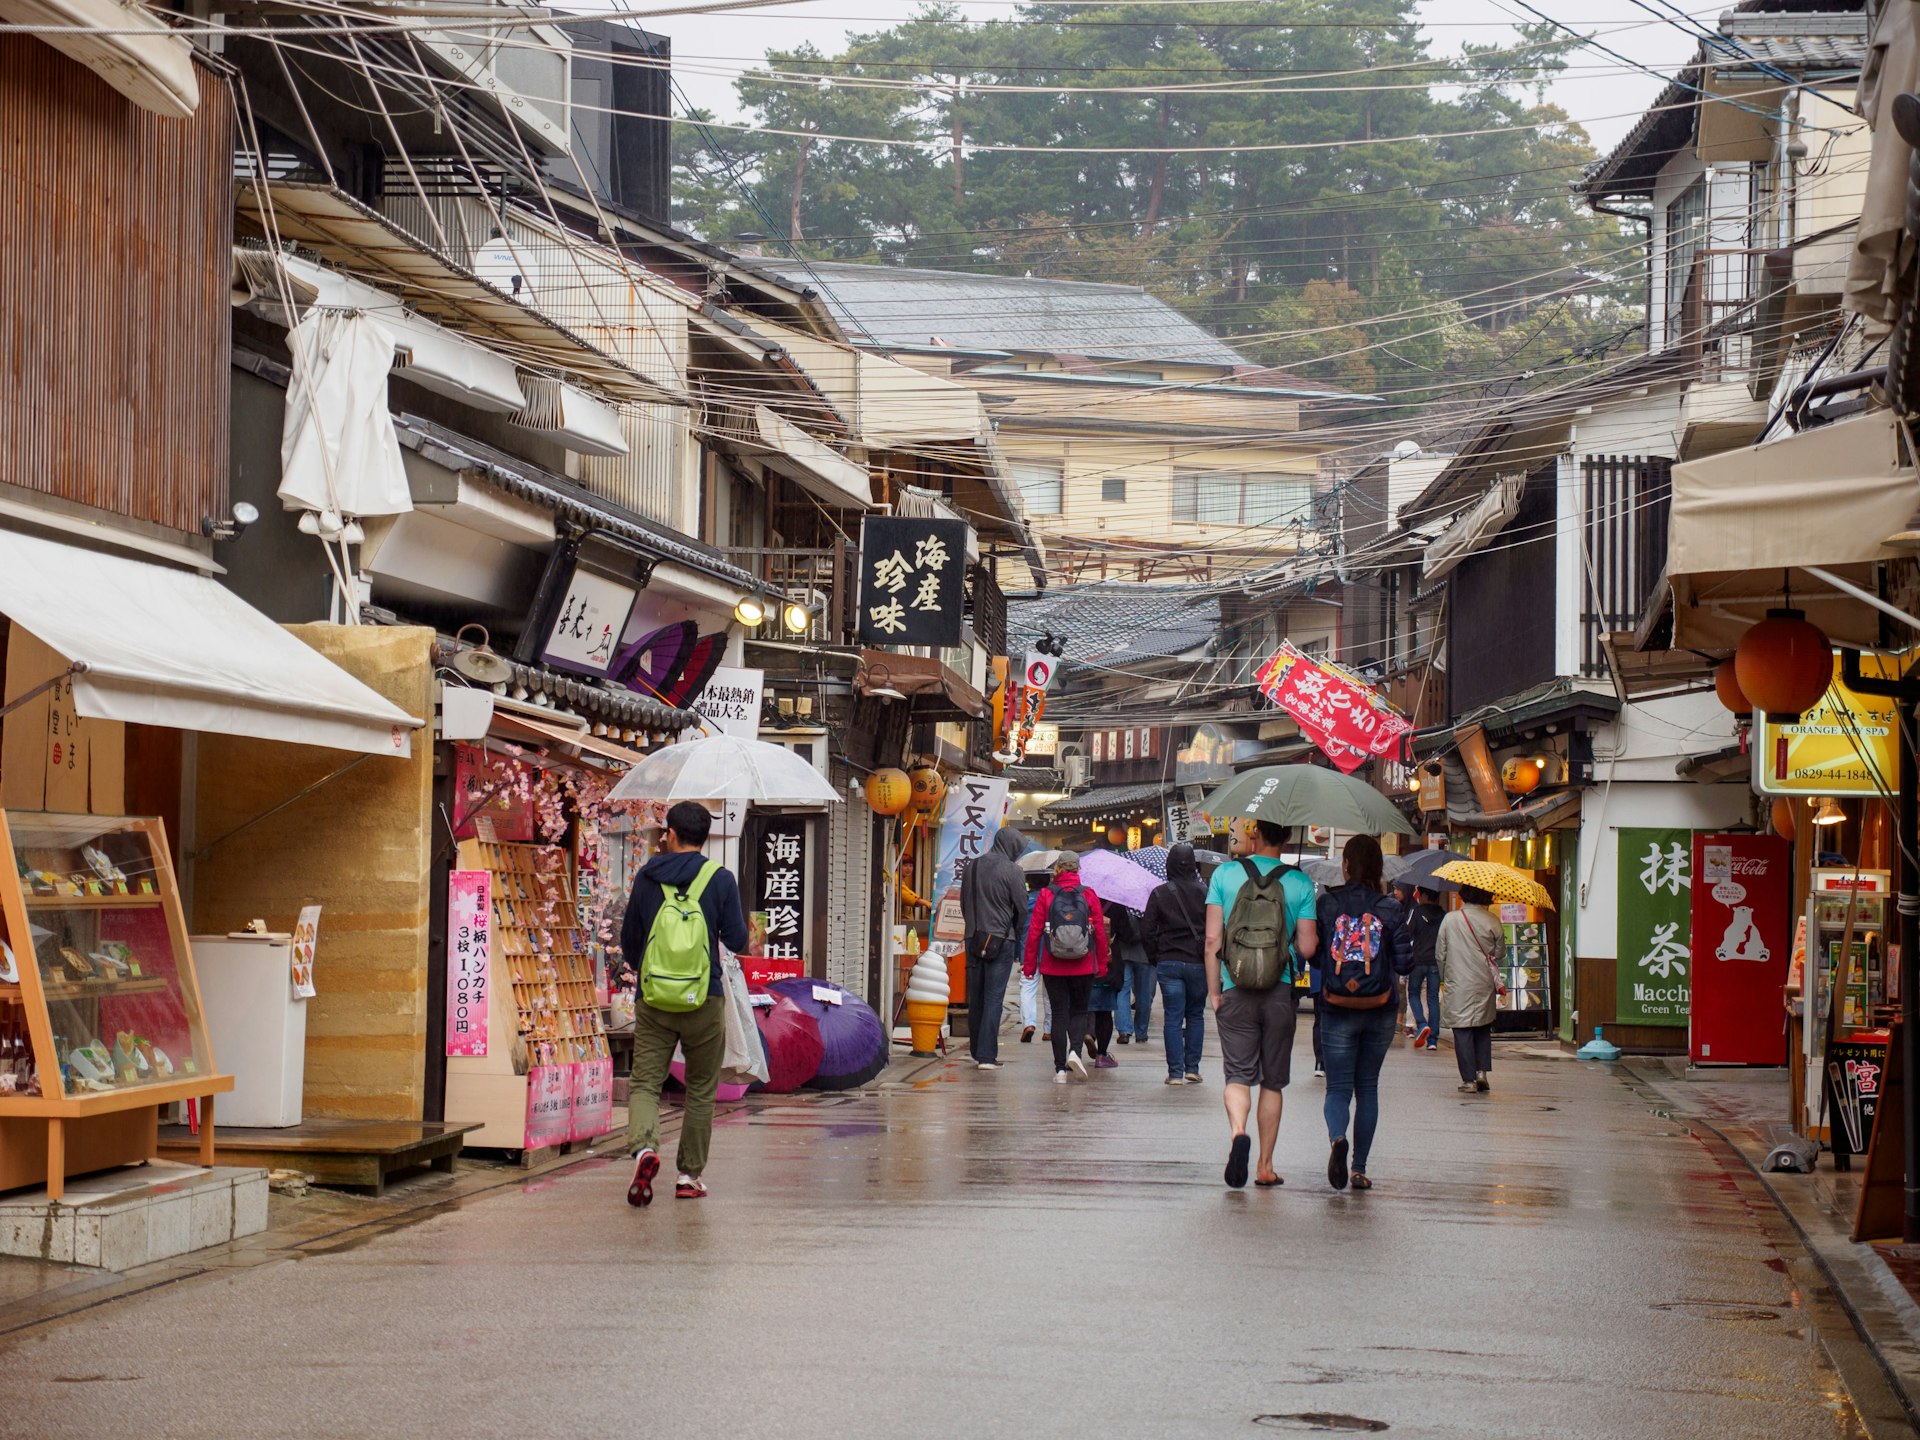 People walk under umbrellas on a street lined with shops on a rainy day